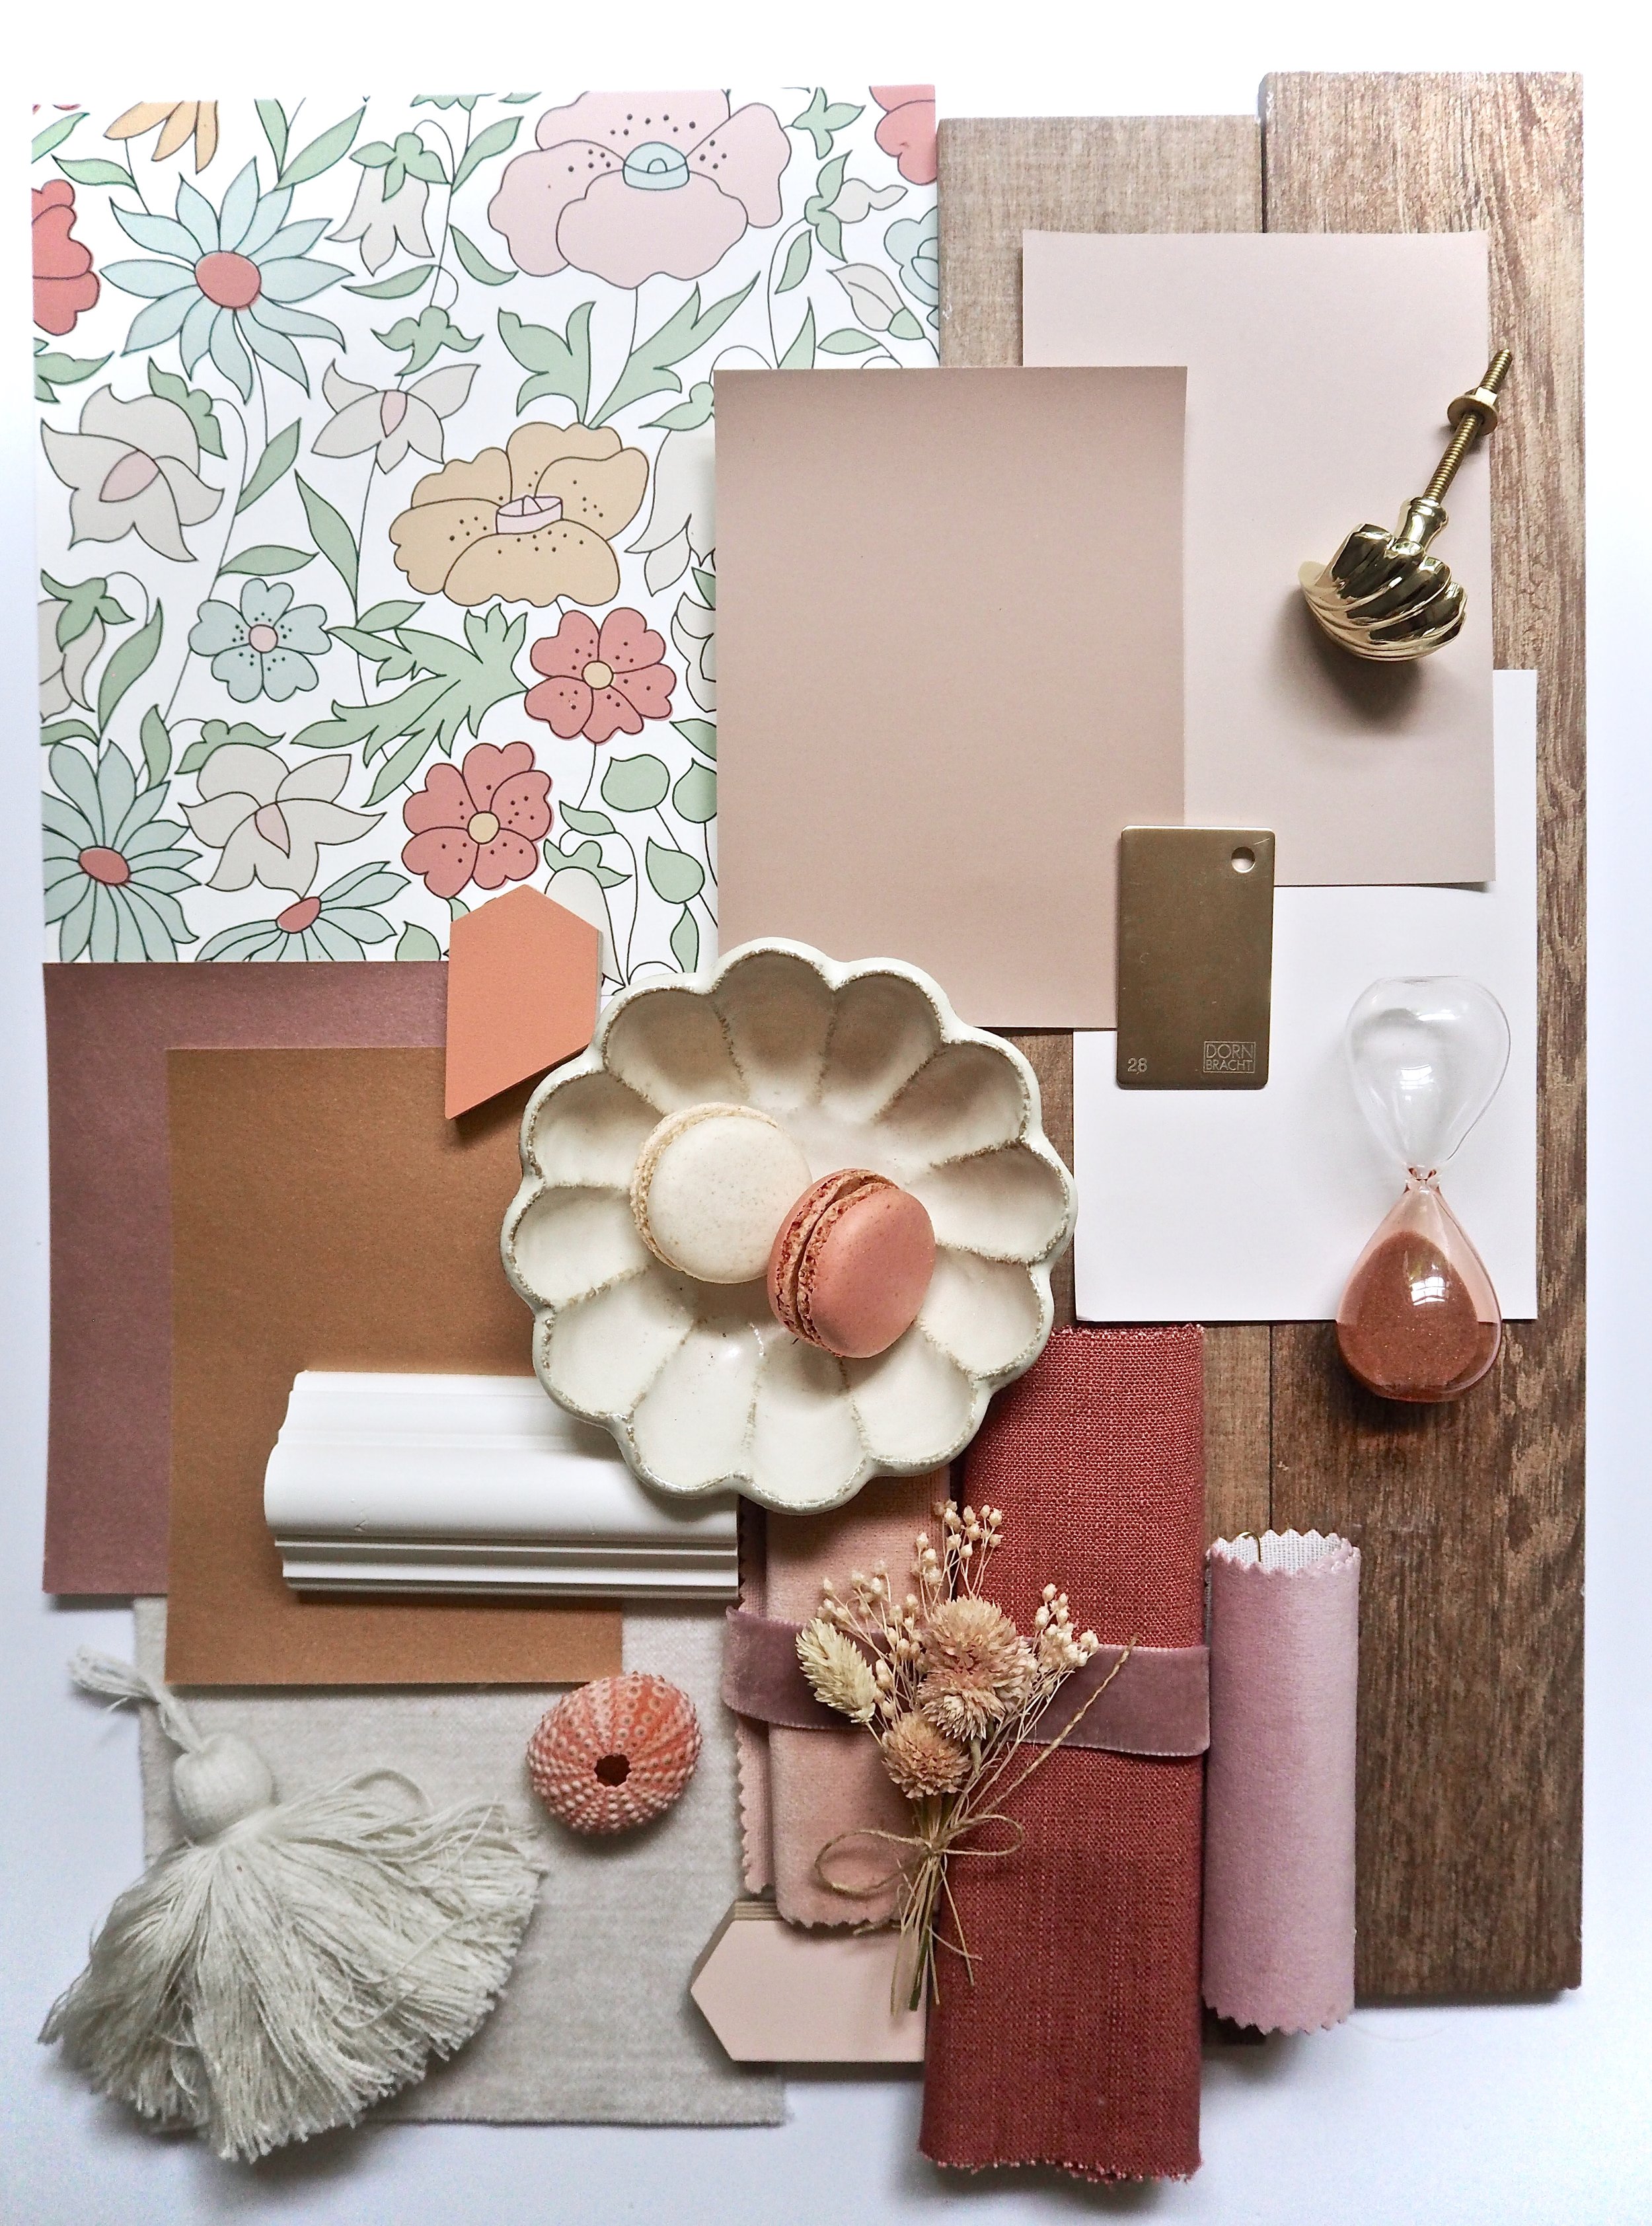 How To Create A Digital Or Physical Mood Board For Interior Design Projects  — MELANIE LISSACK INTERIORS